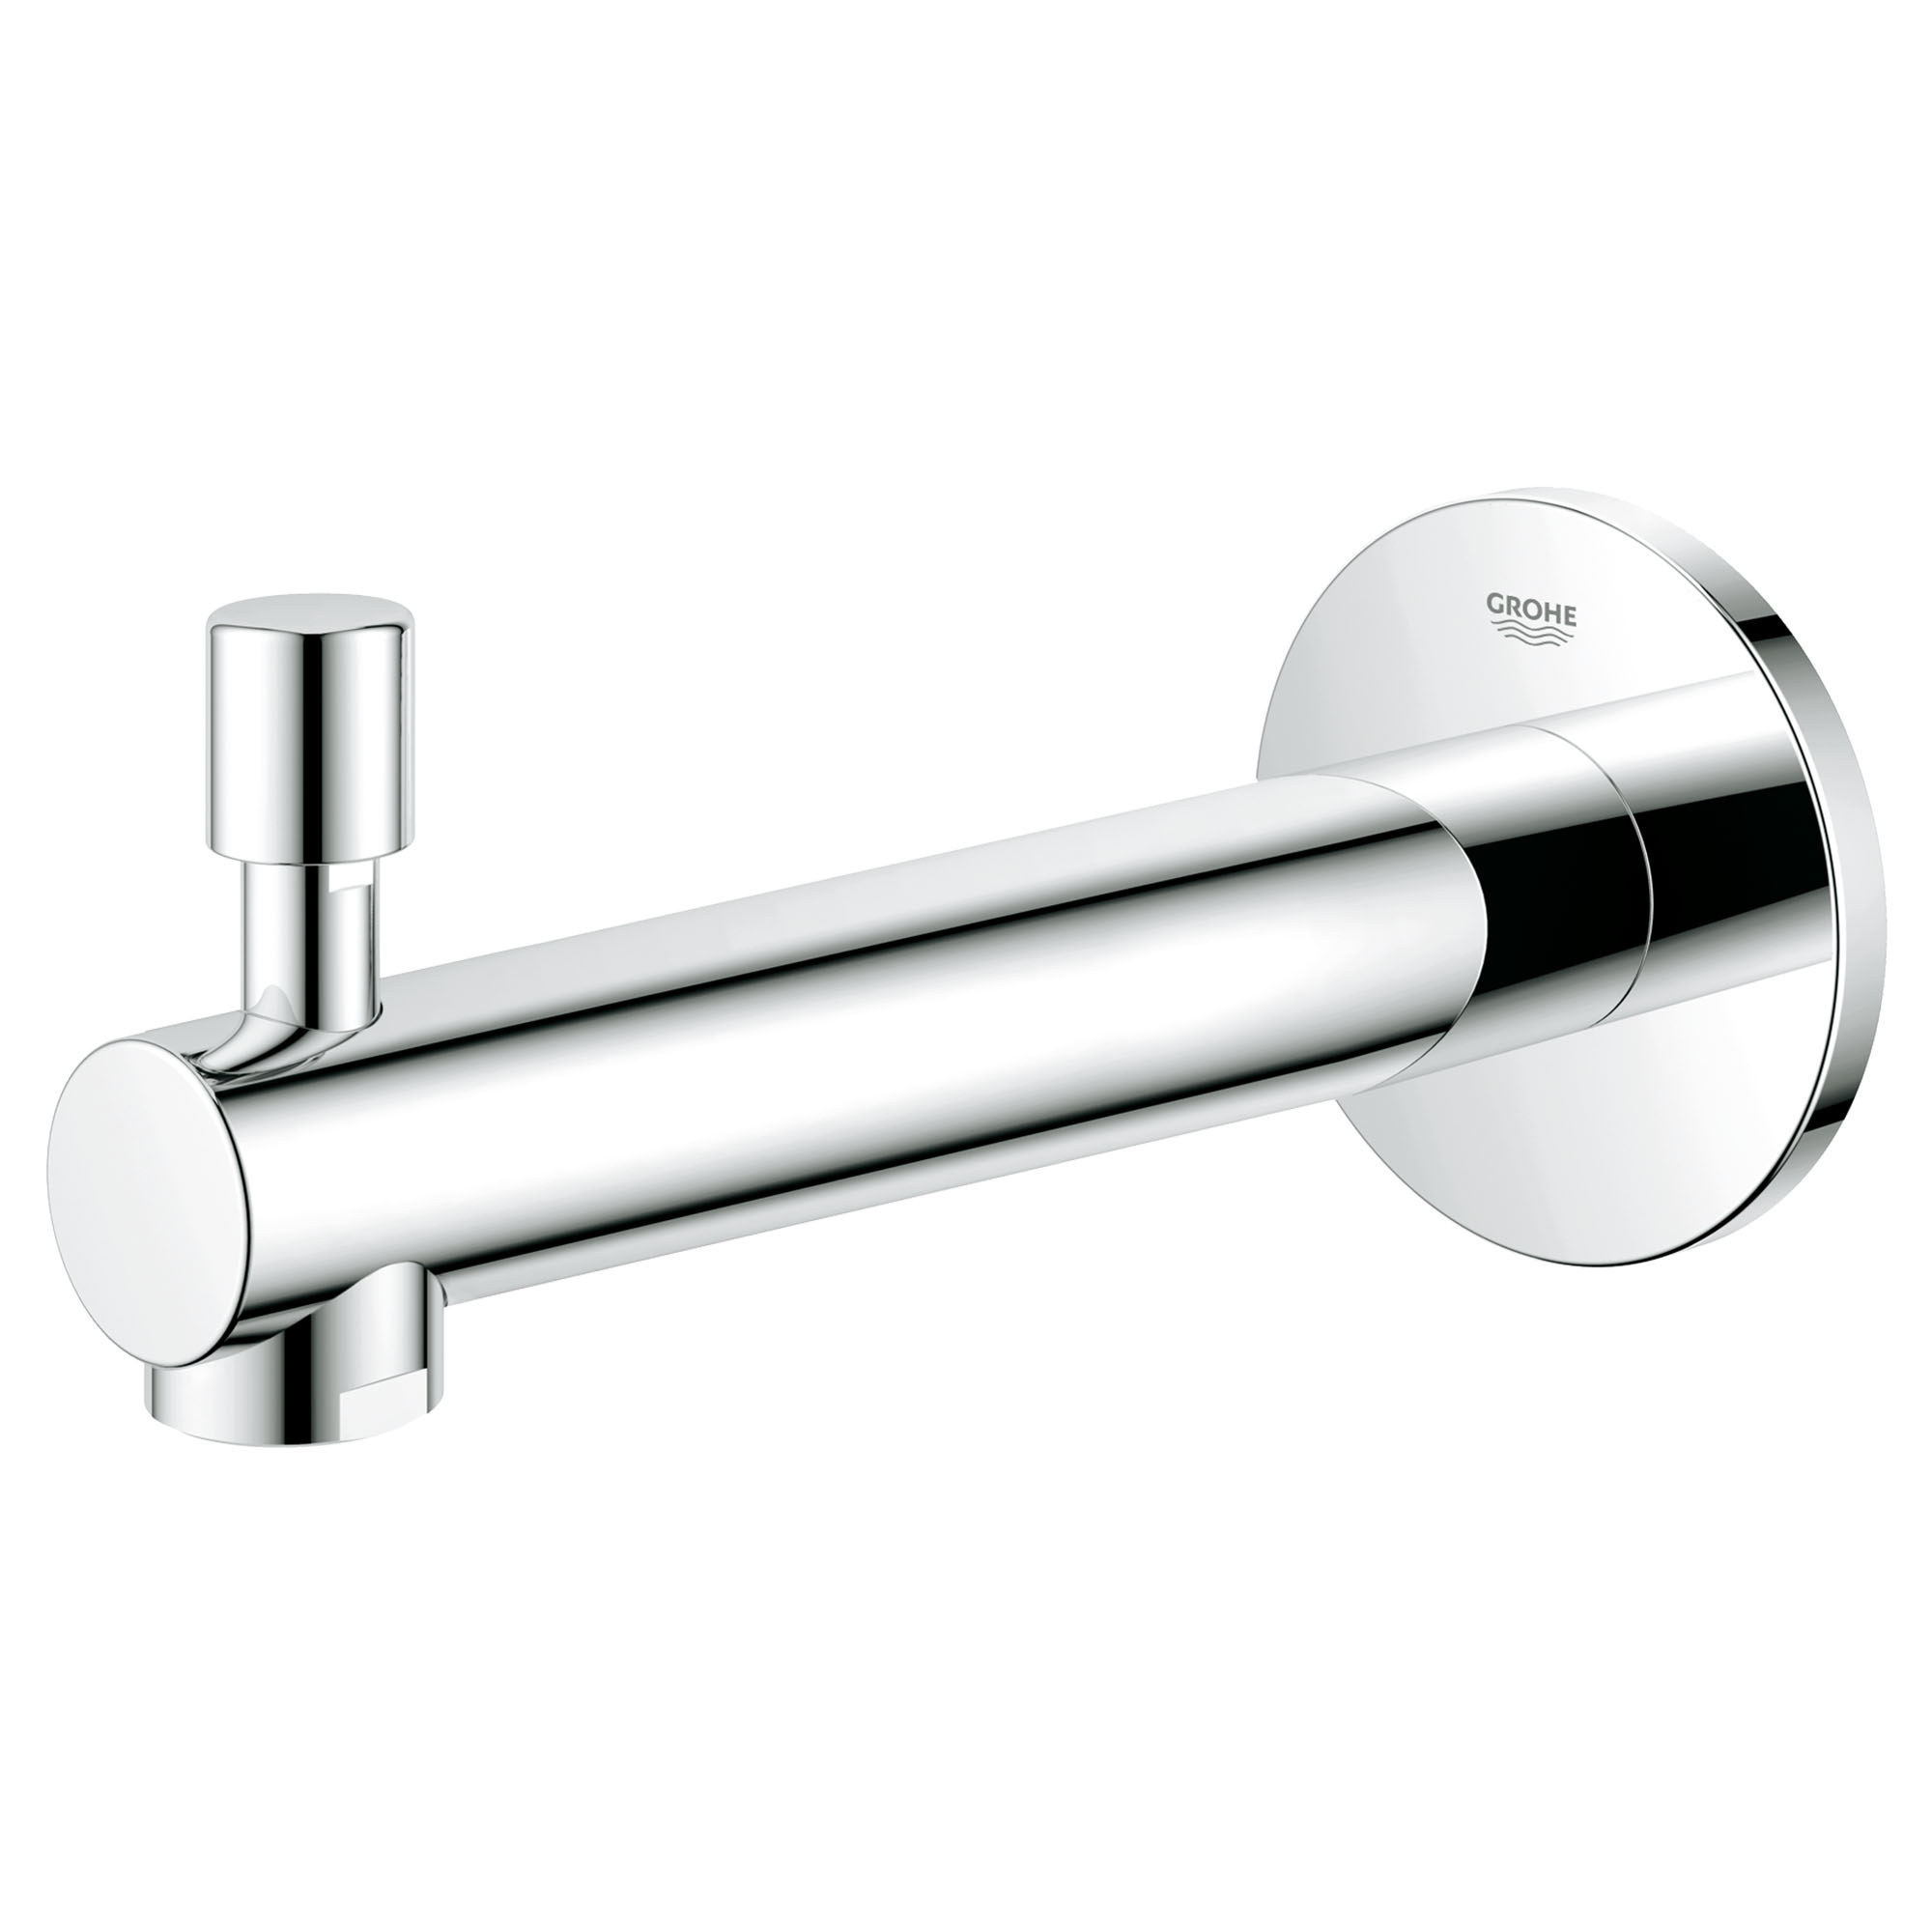 GROHE - GROHE JOINT TORIQUE 01285 - 27547 27547 - Cipac